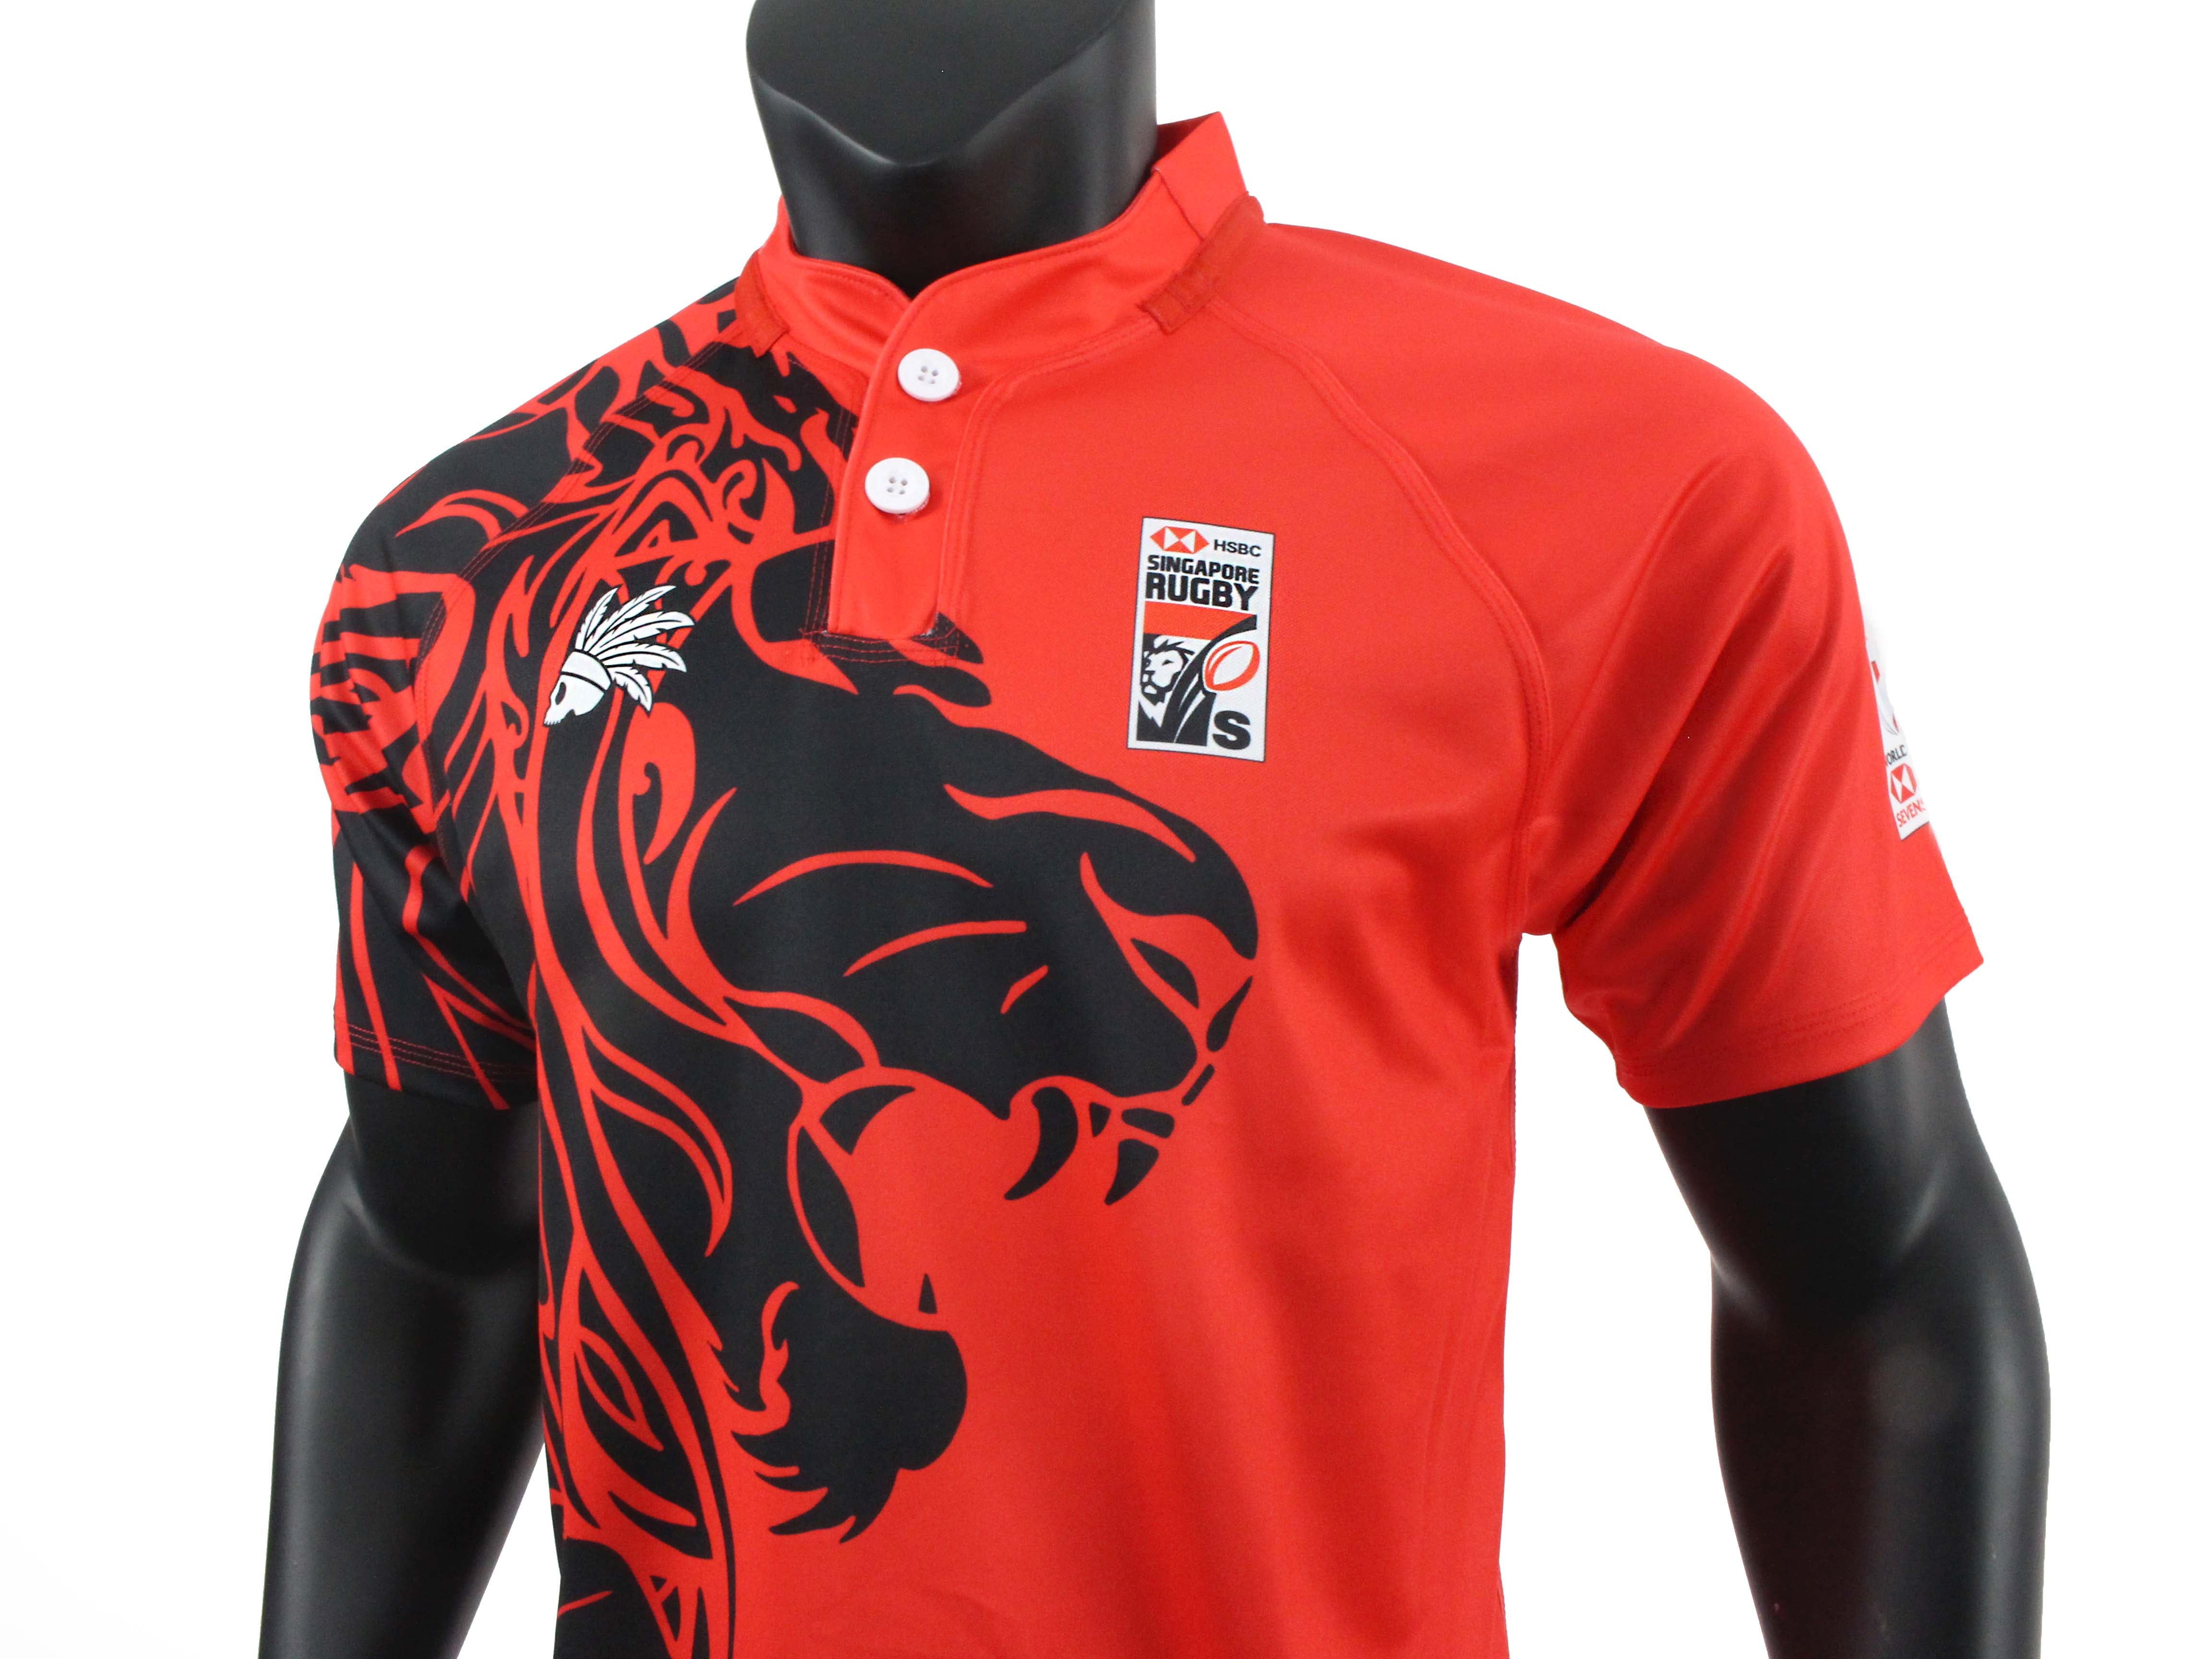 SINGAPORE RUGBY JERSEY